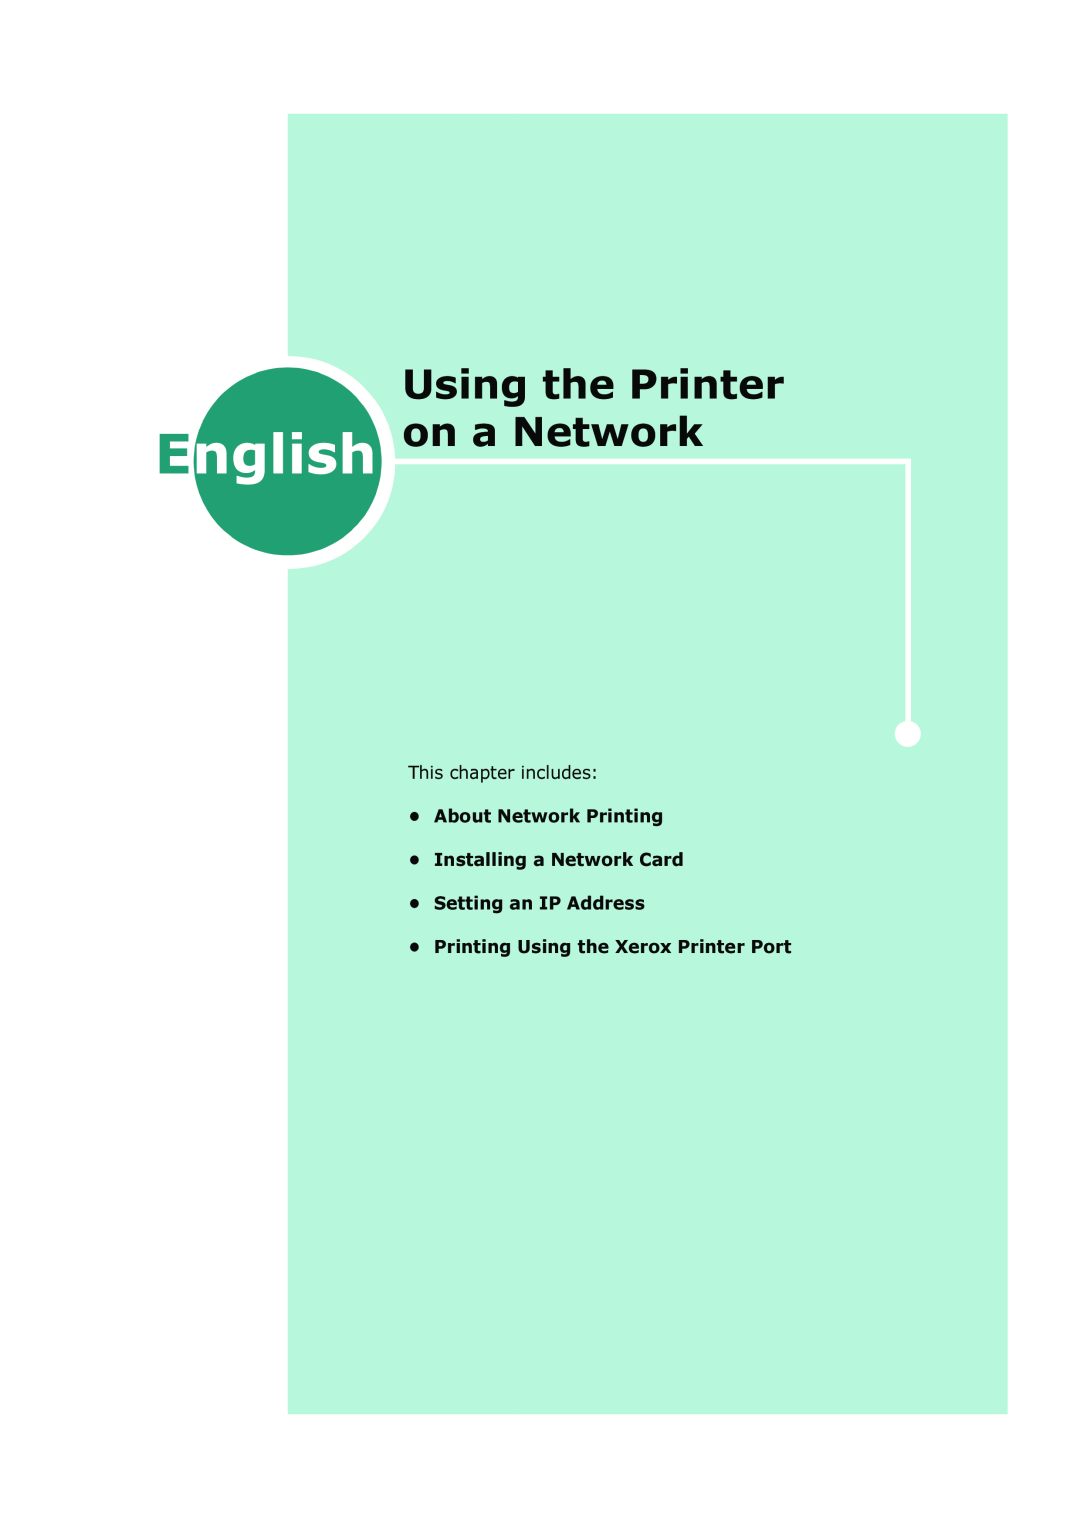 Xerox 3150 manual Using the Printer English on a Network, This chapter includes About Network Printing 